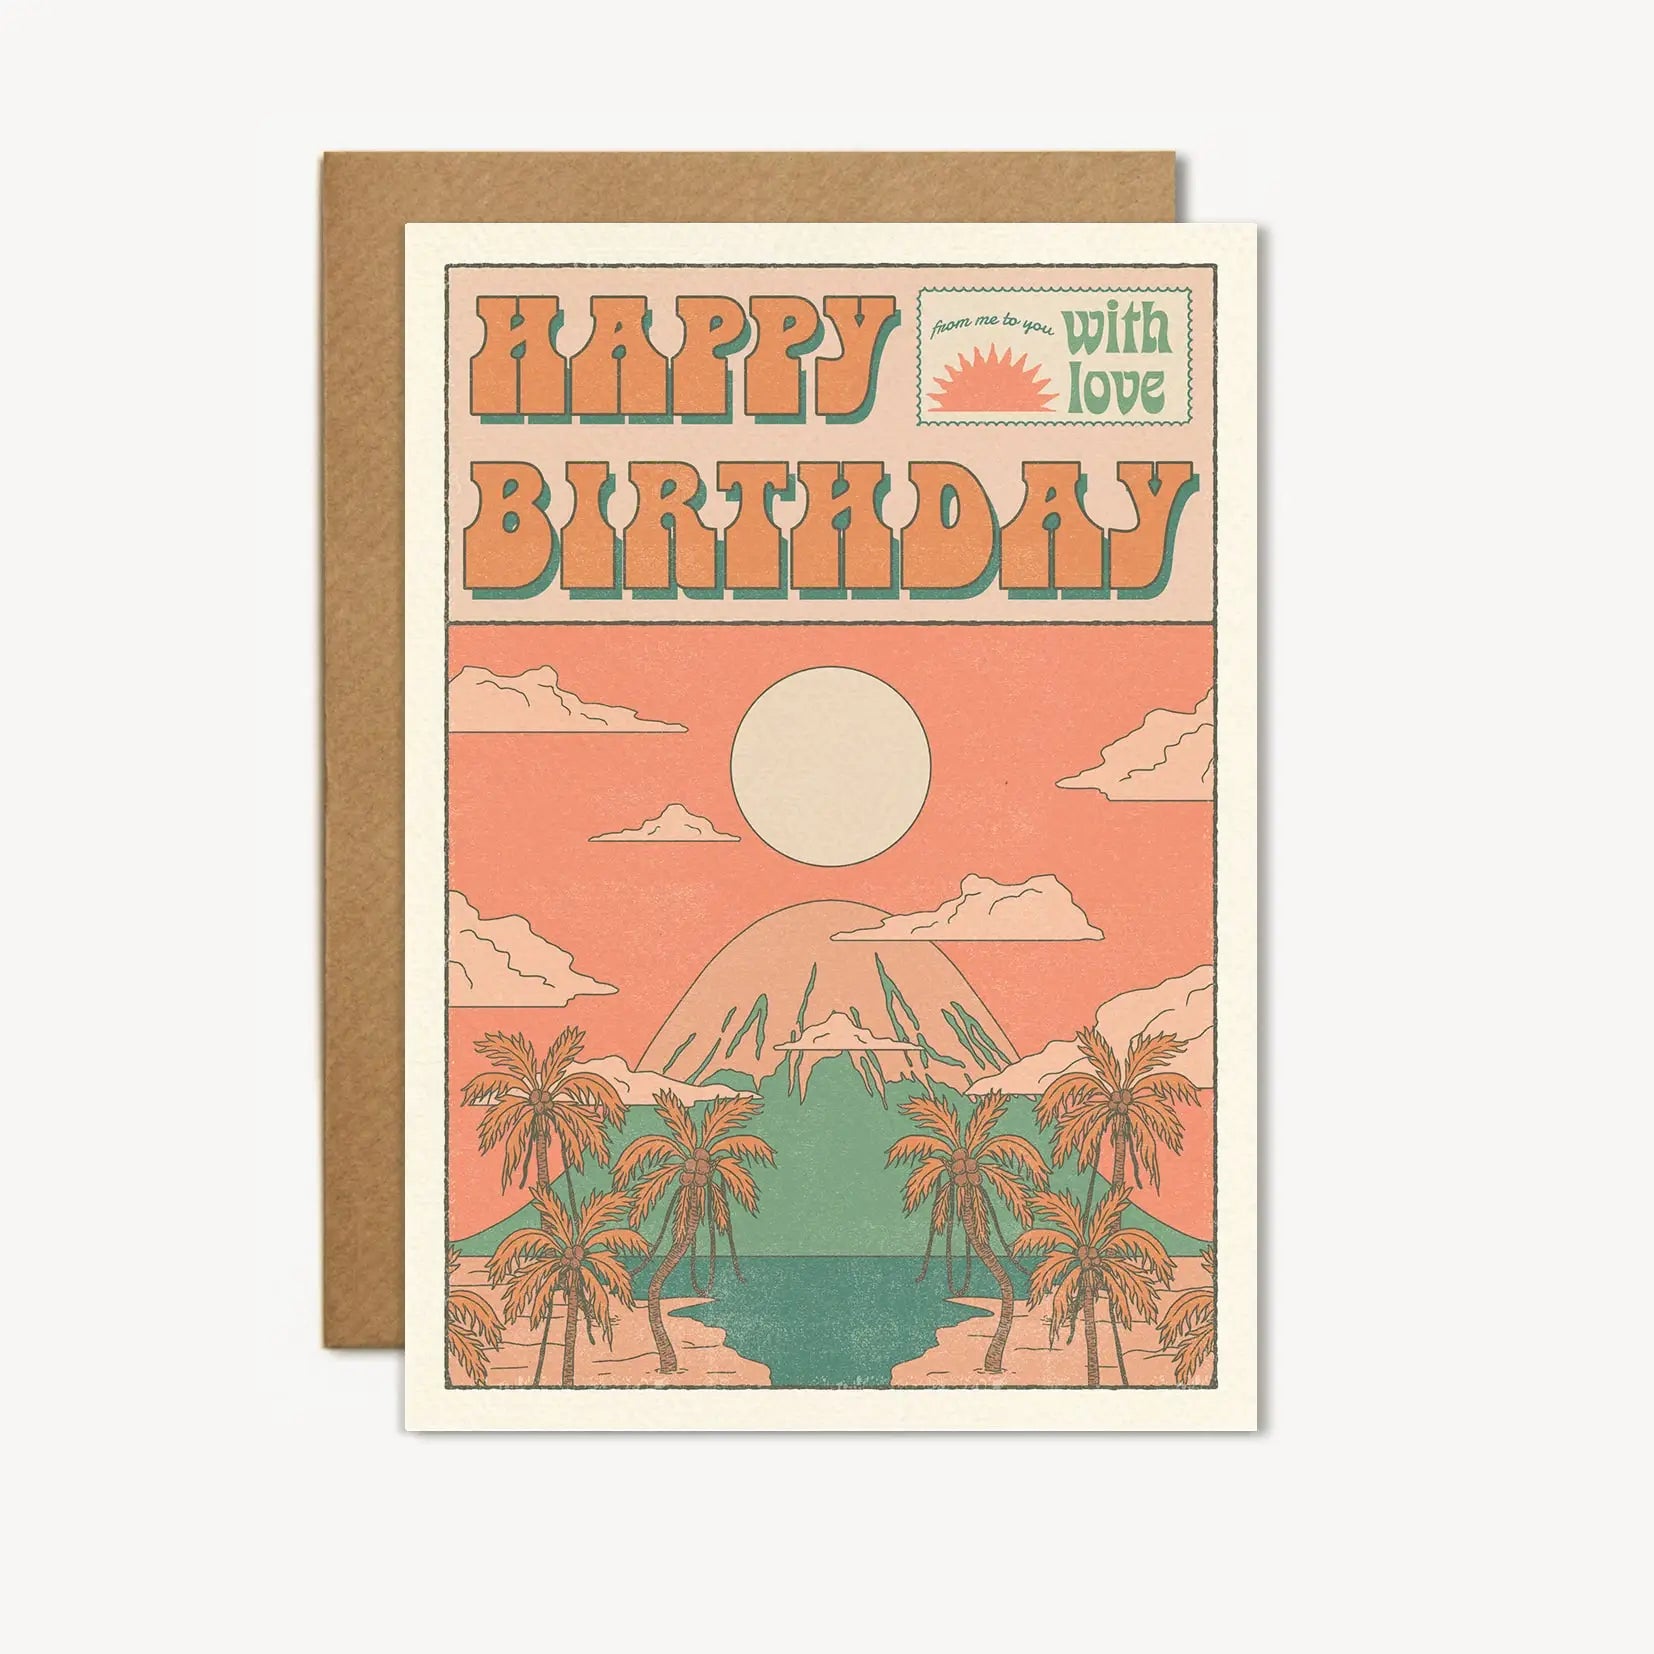 Happy Birthday with Love - Greeting Card